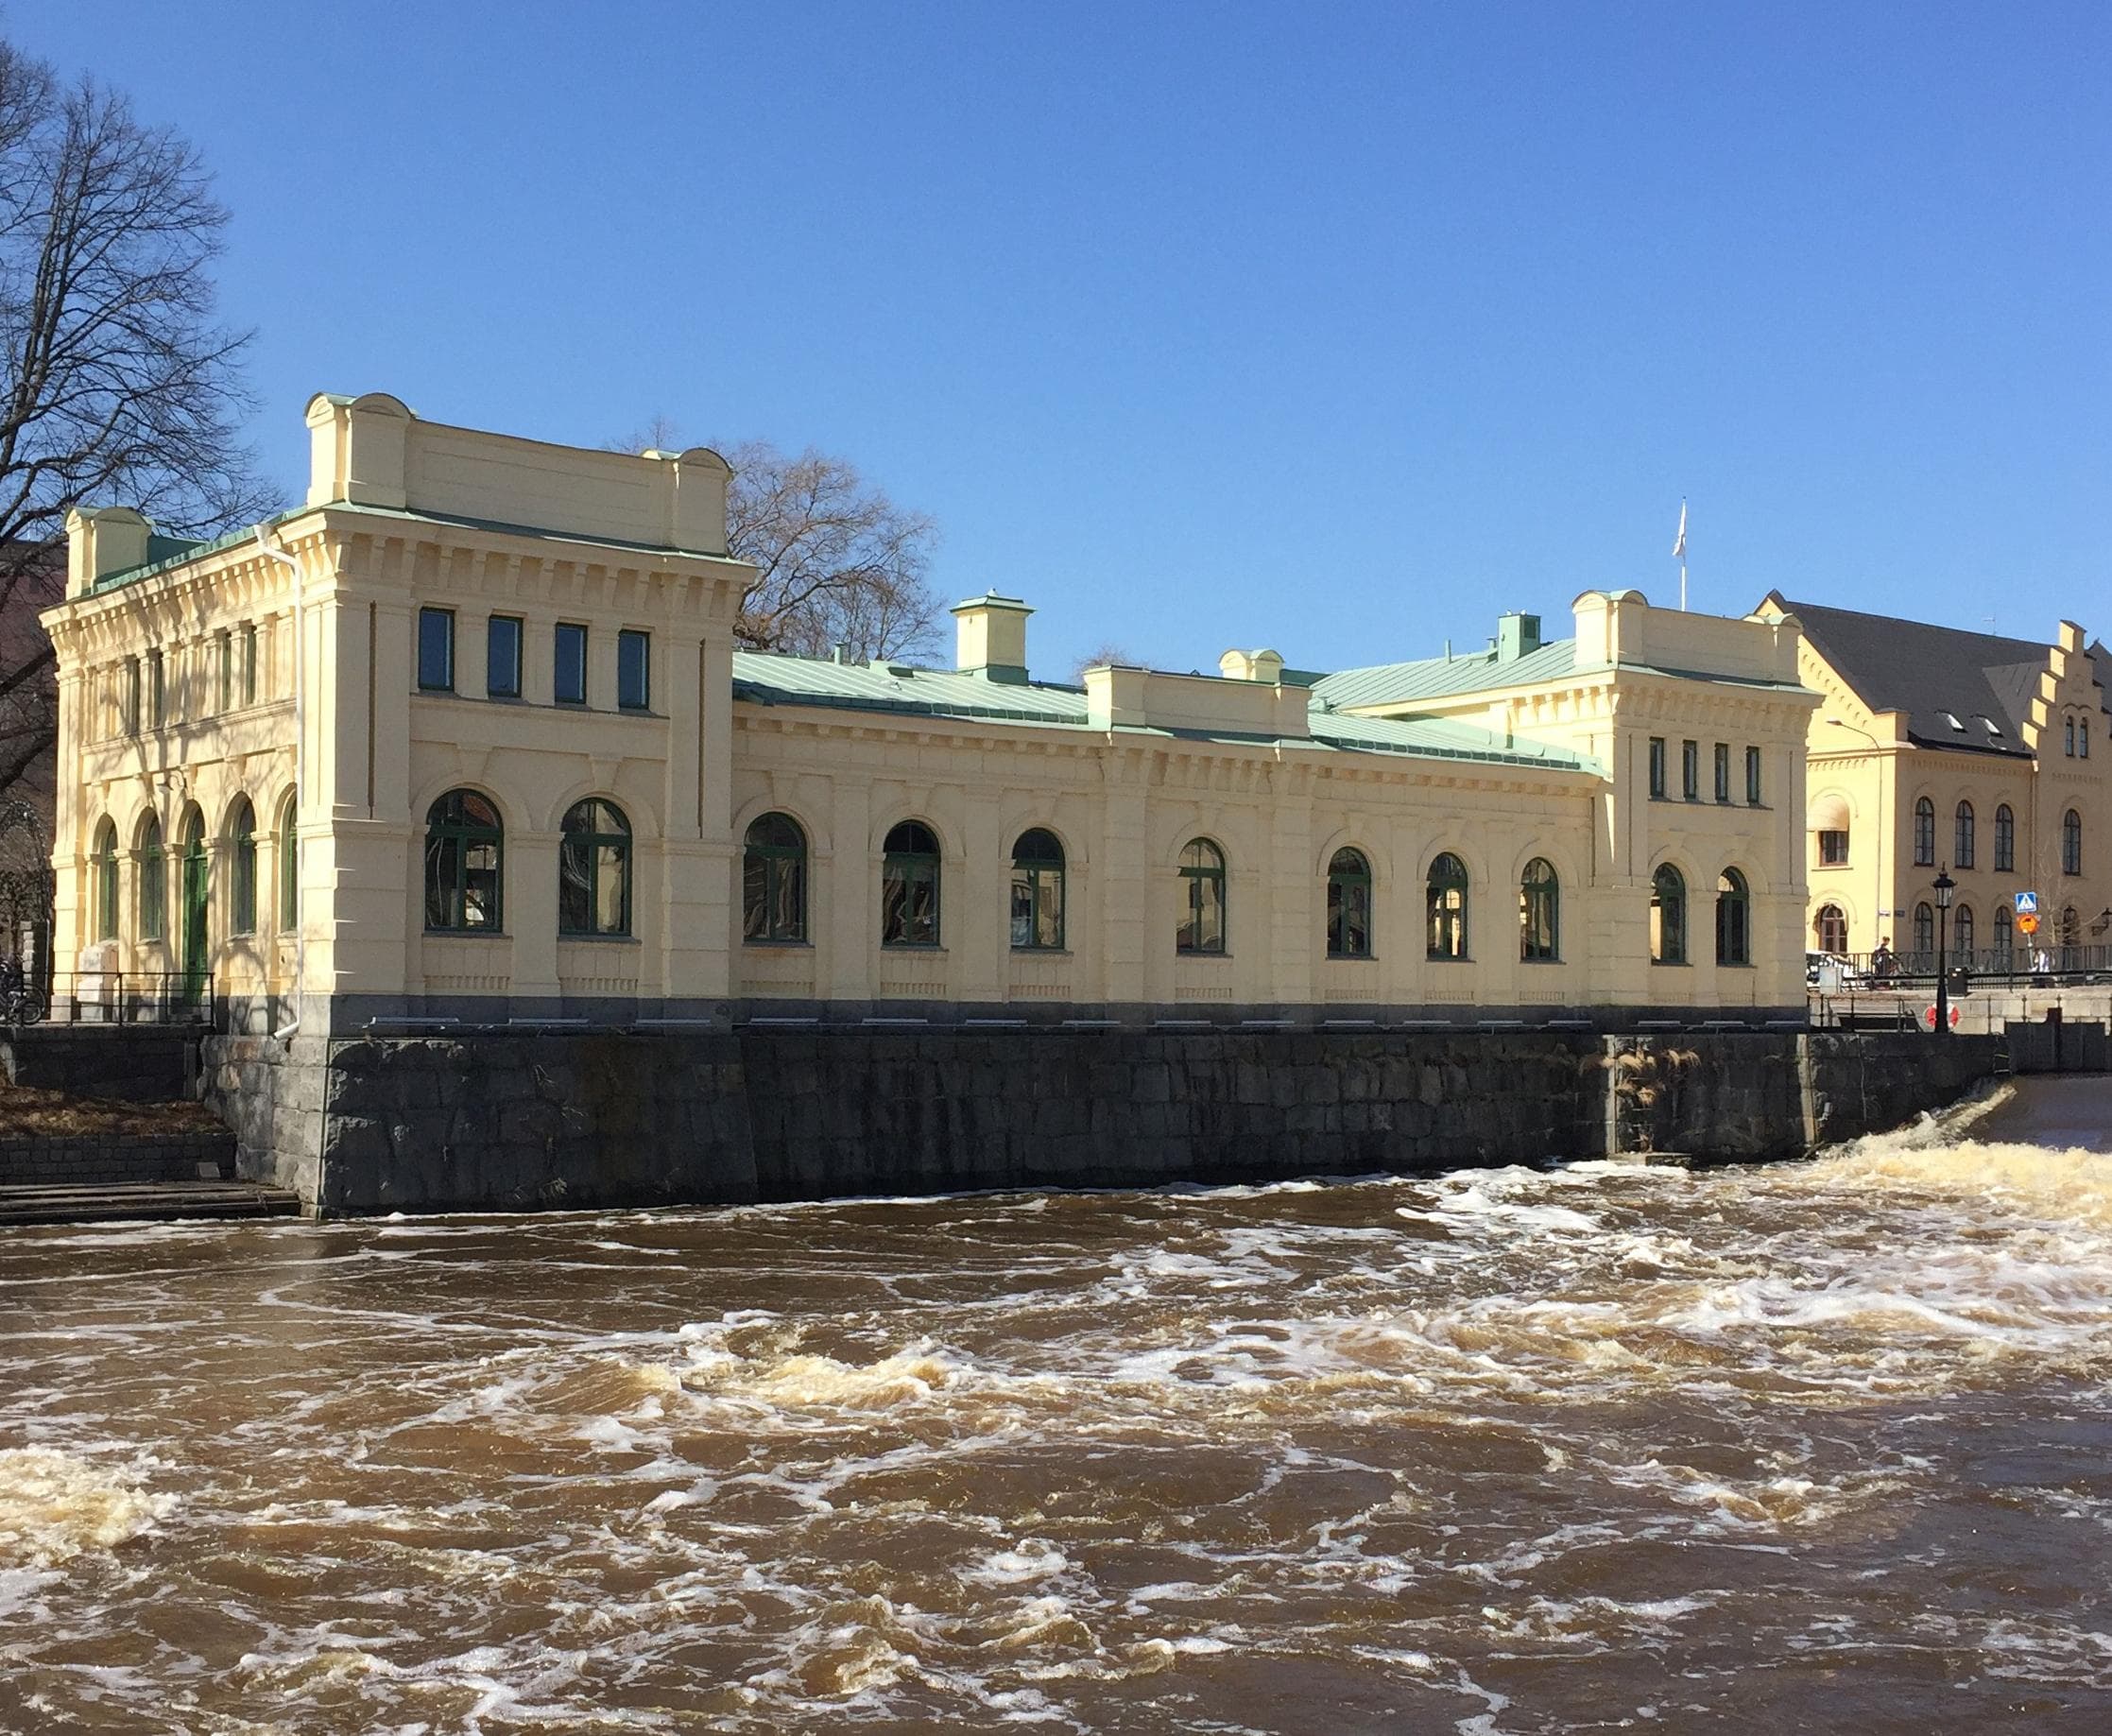 Image of The Pump House by Fyrisån